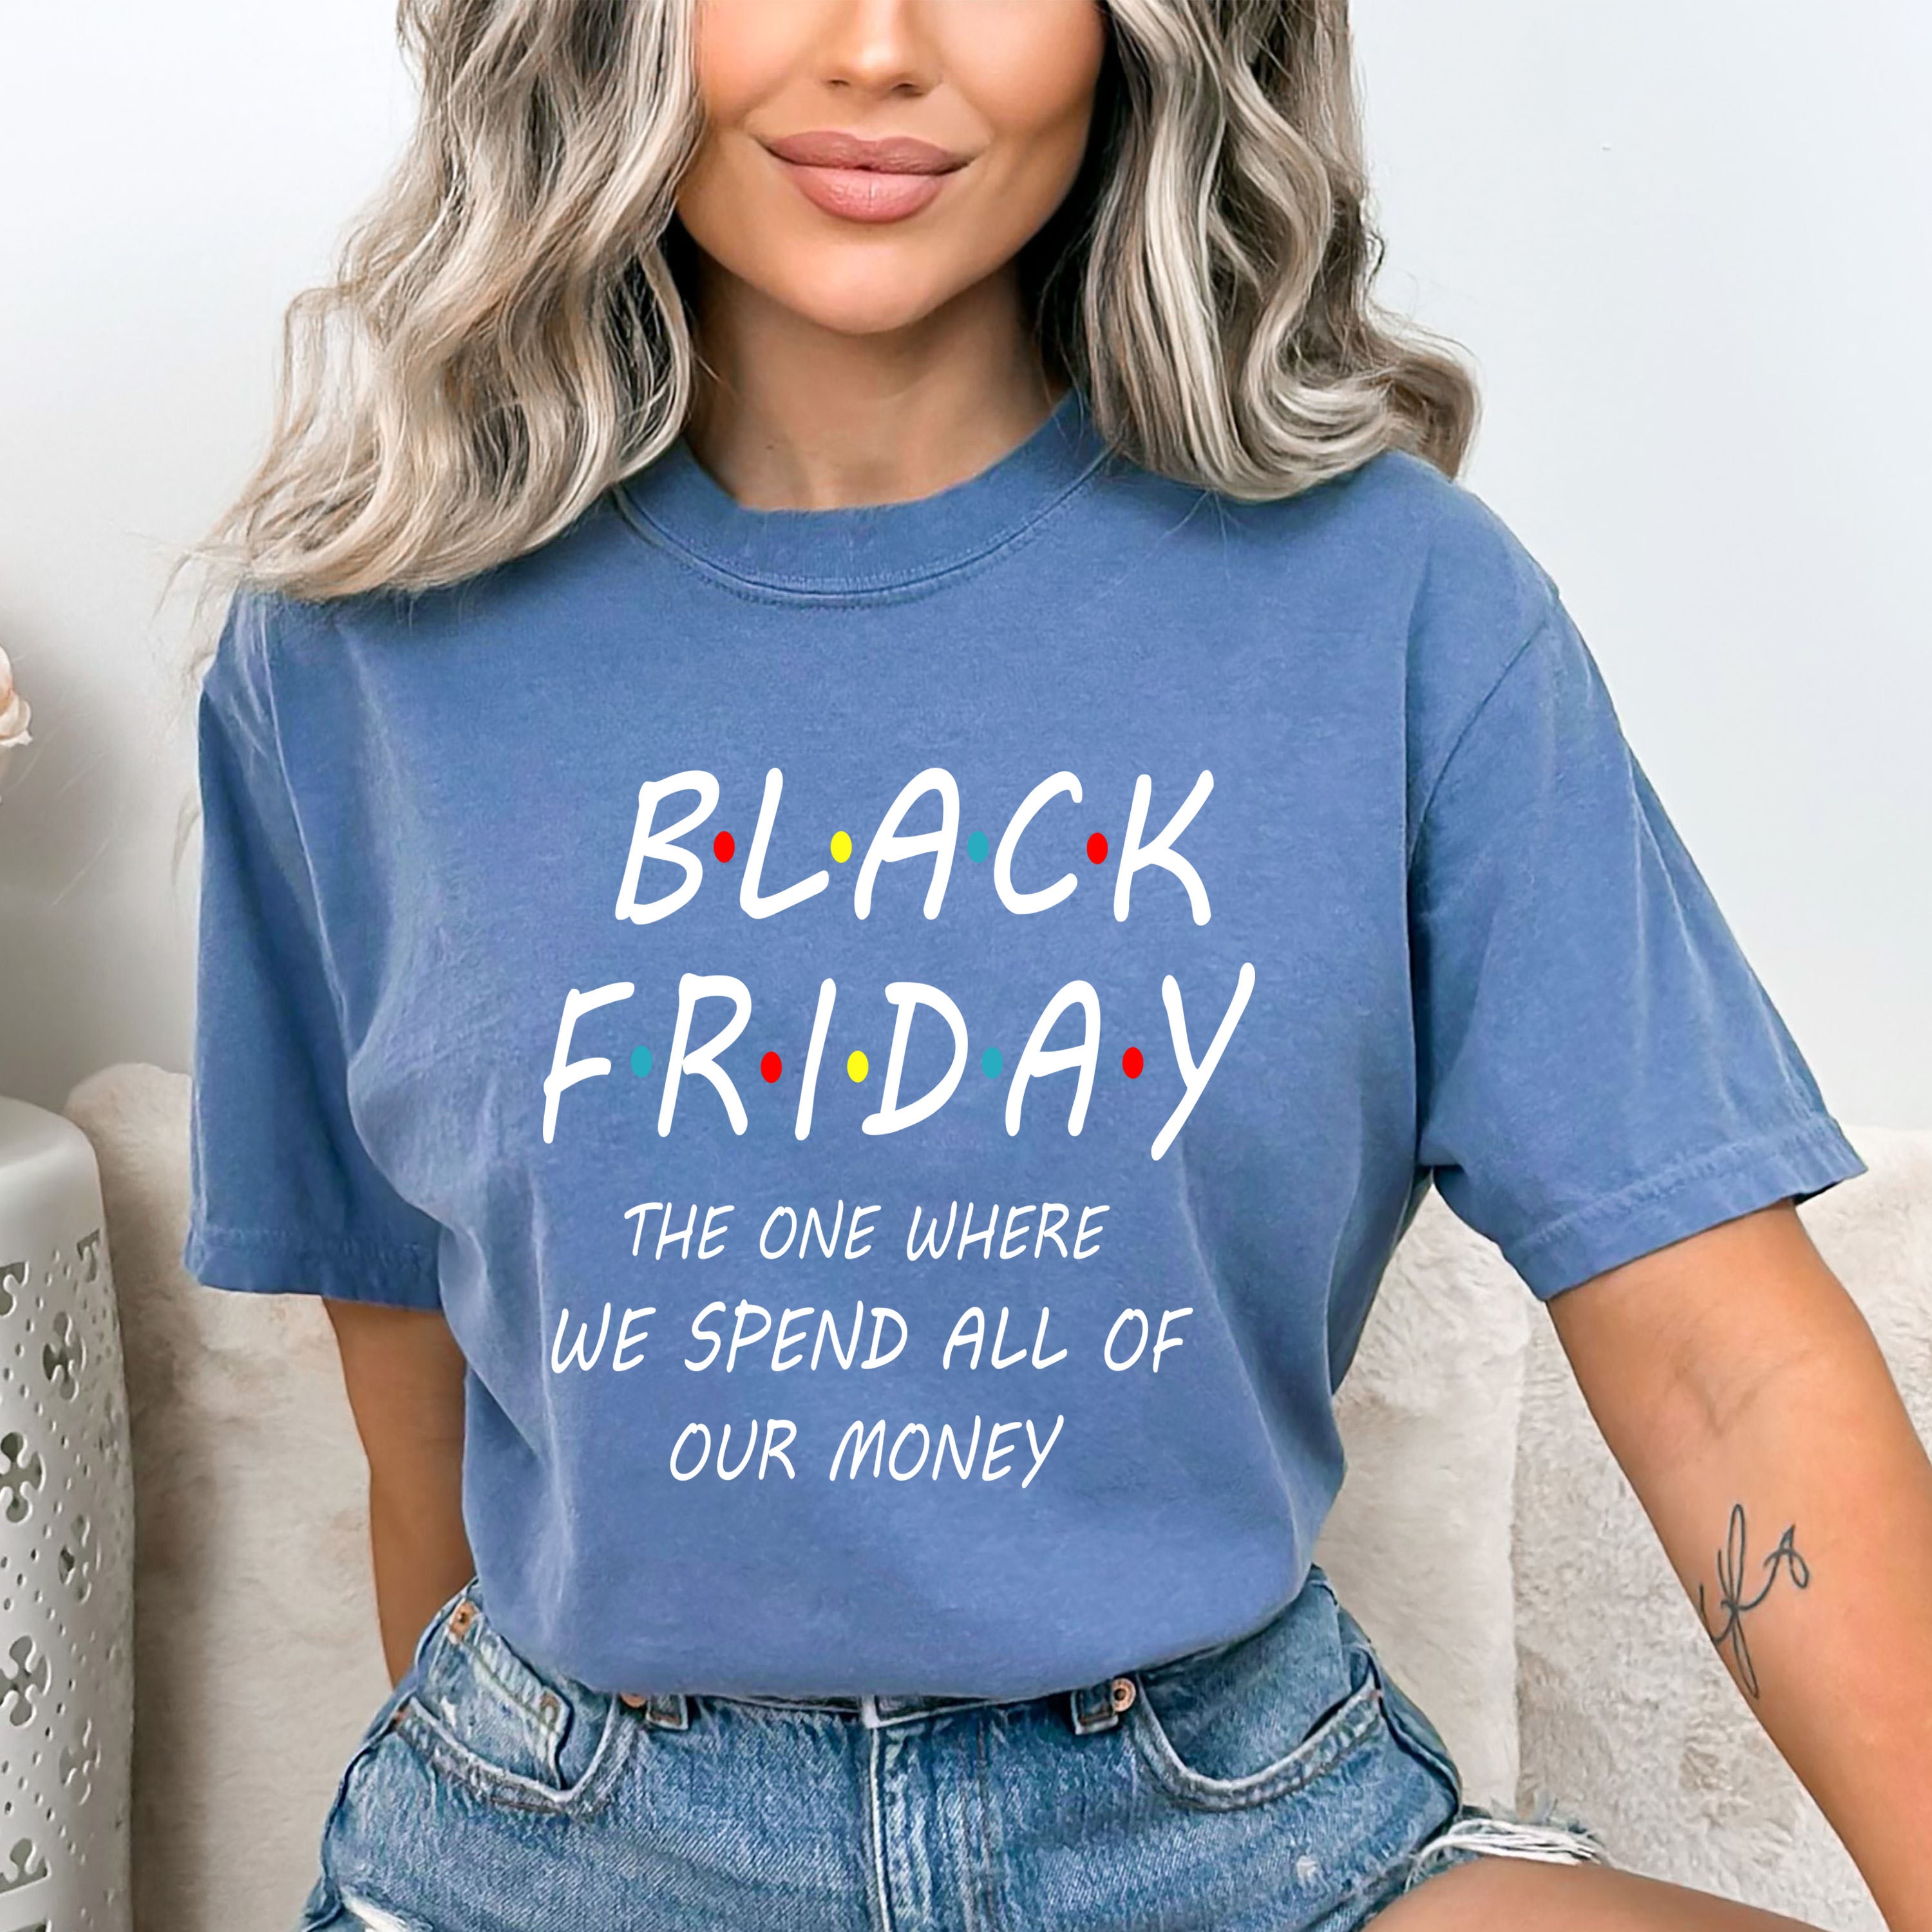 We Spend All Of Our Money - Bella canvas